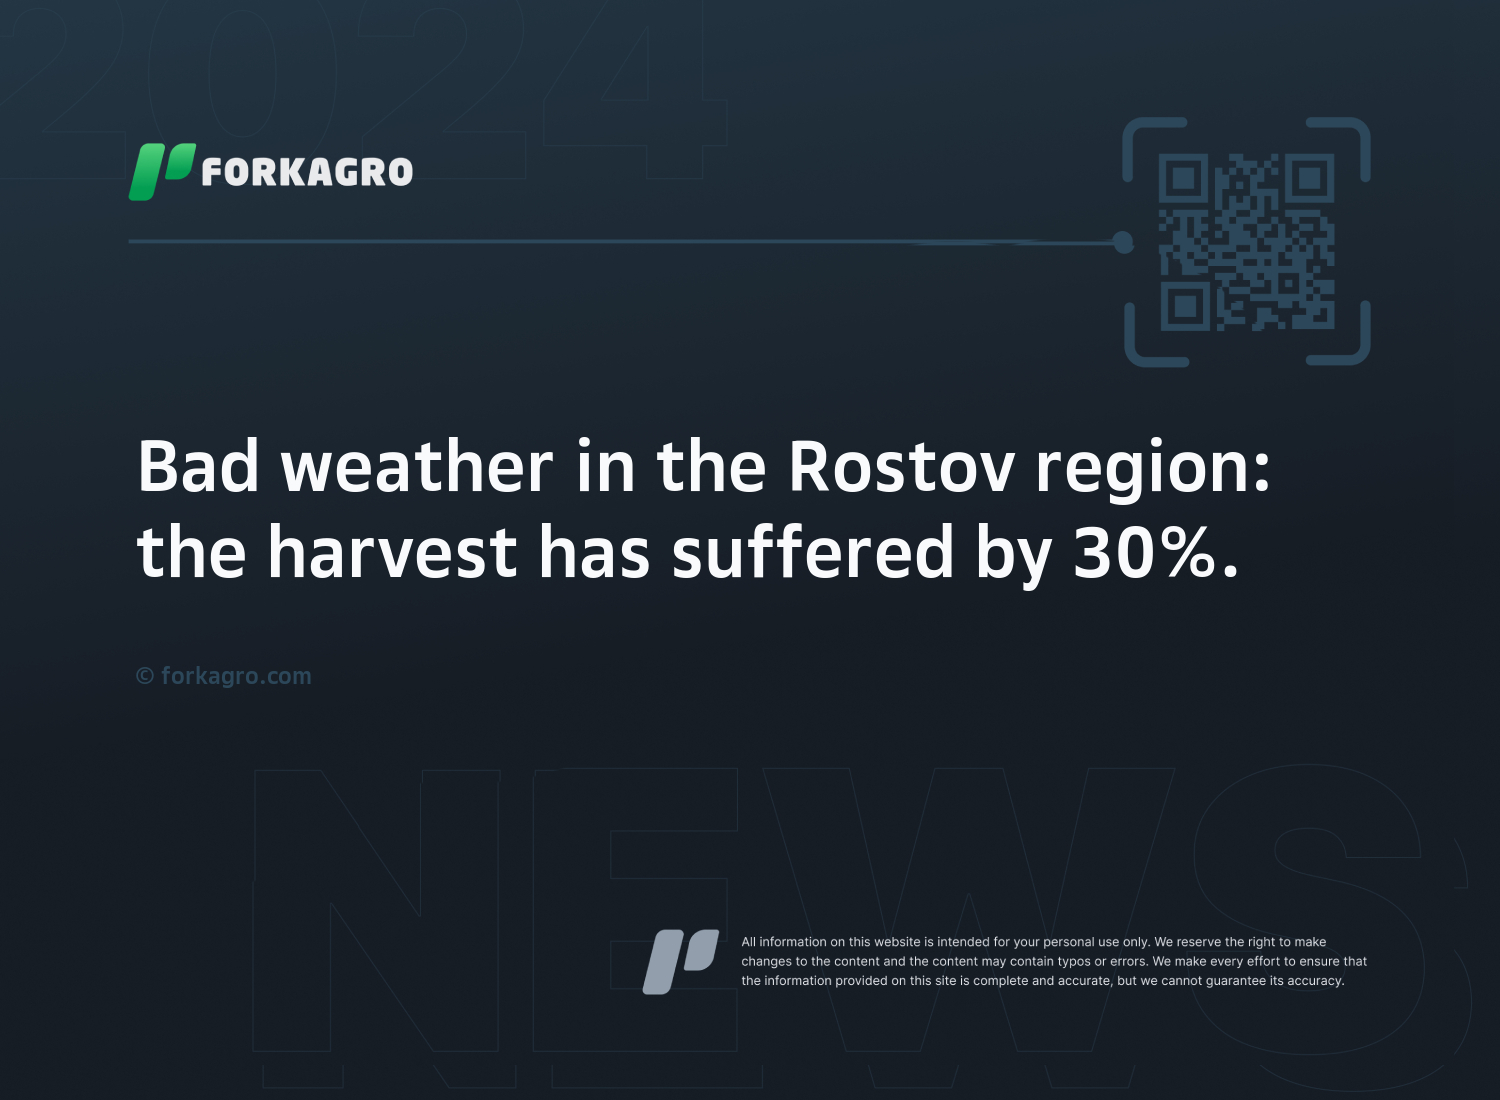 Bad weather in the Rostov region: the harvest has suffered by 30%.